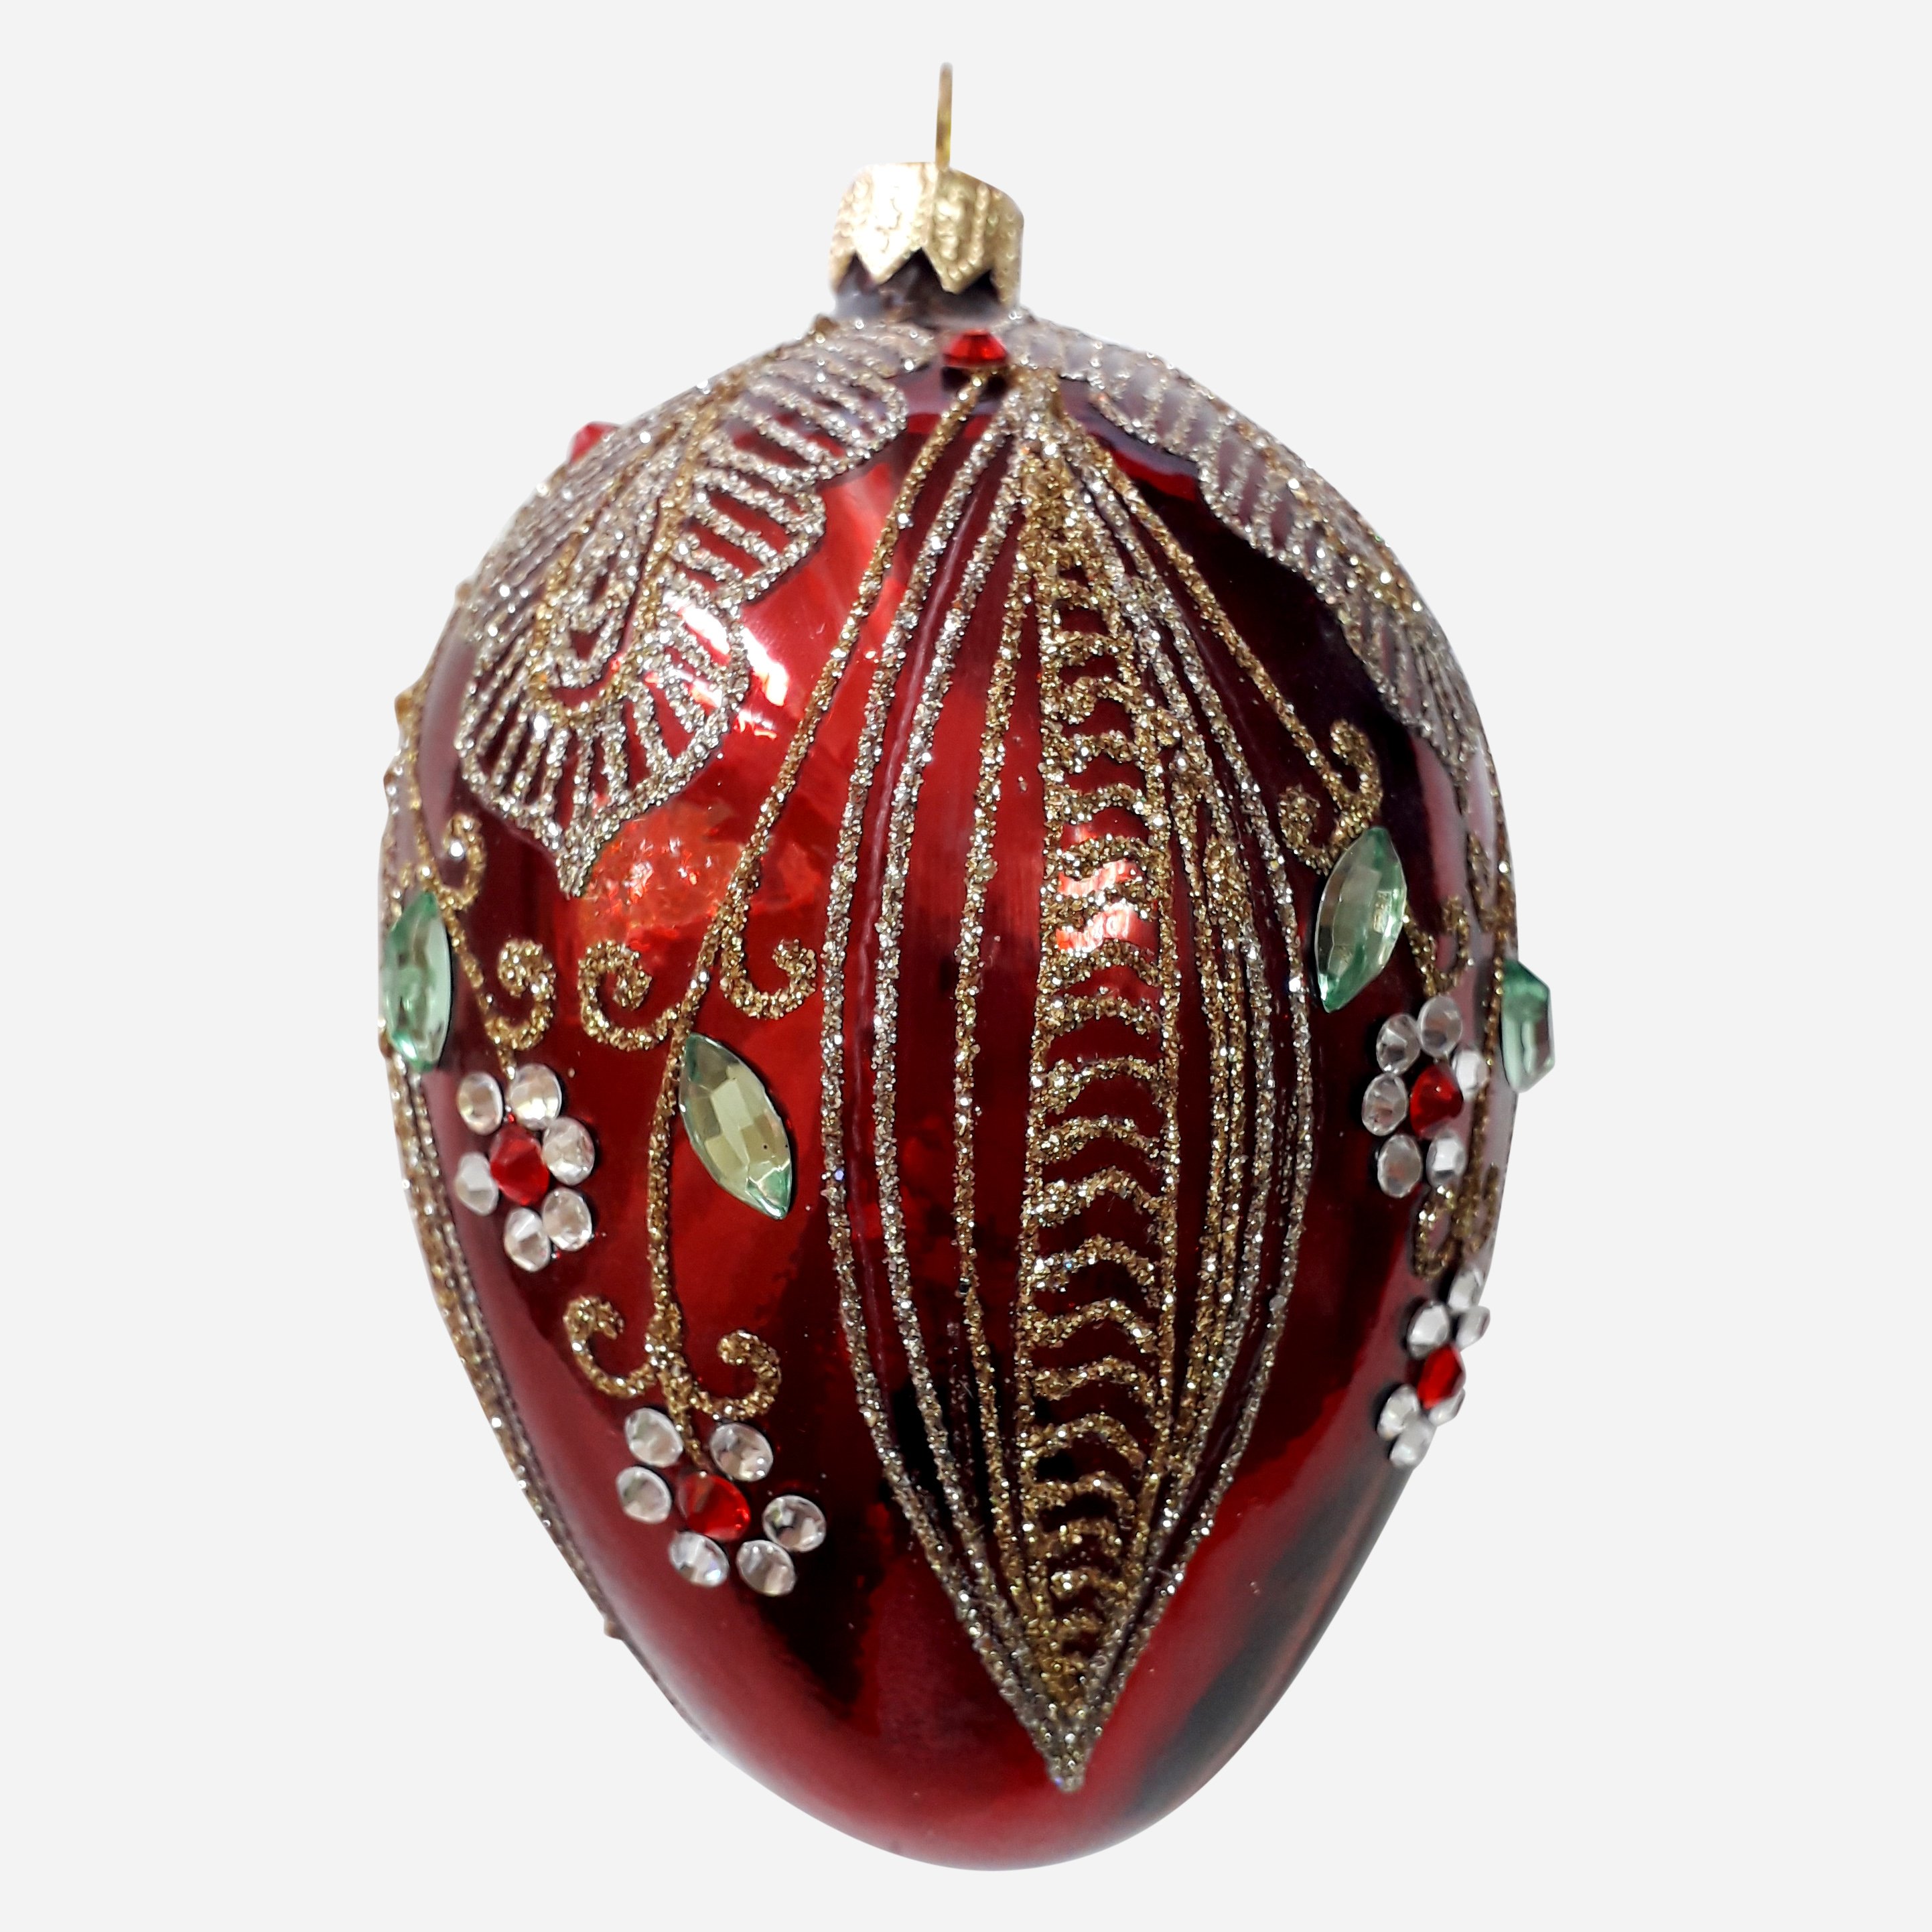 Image of Red Egg with Gems Ornament